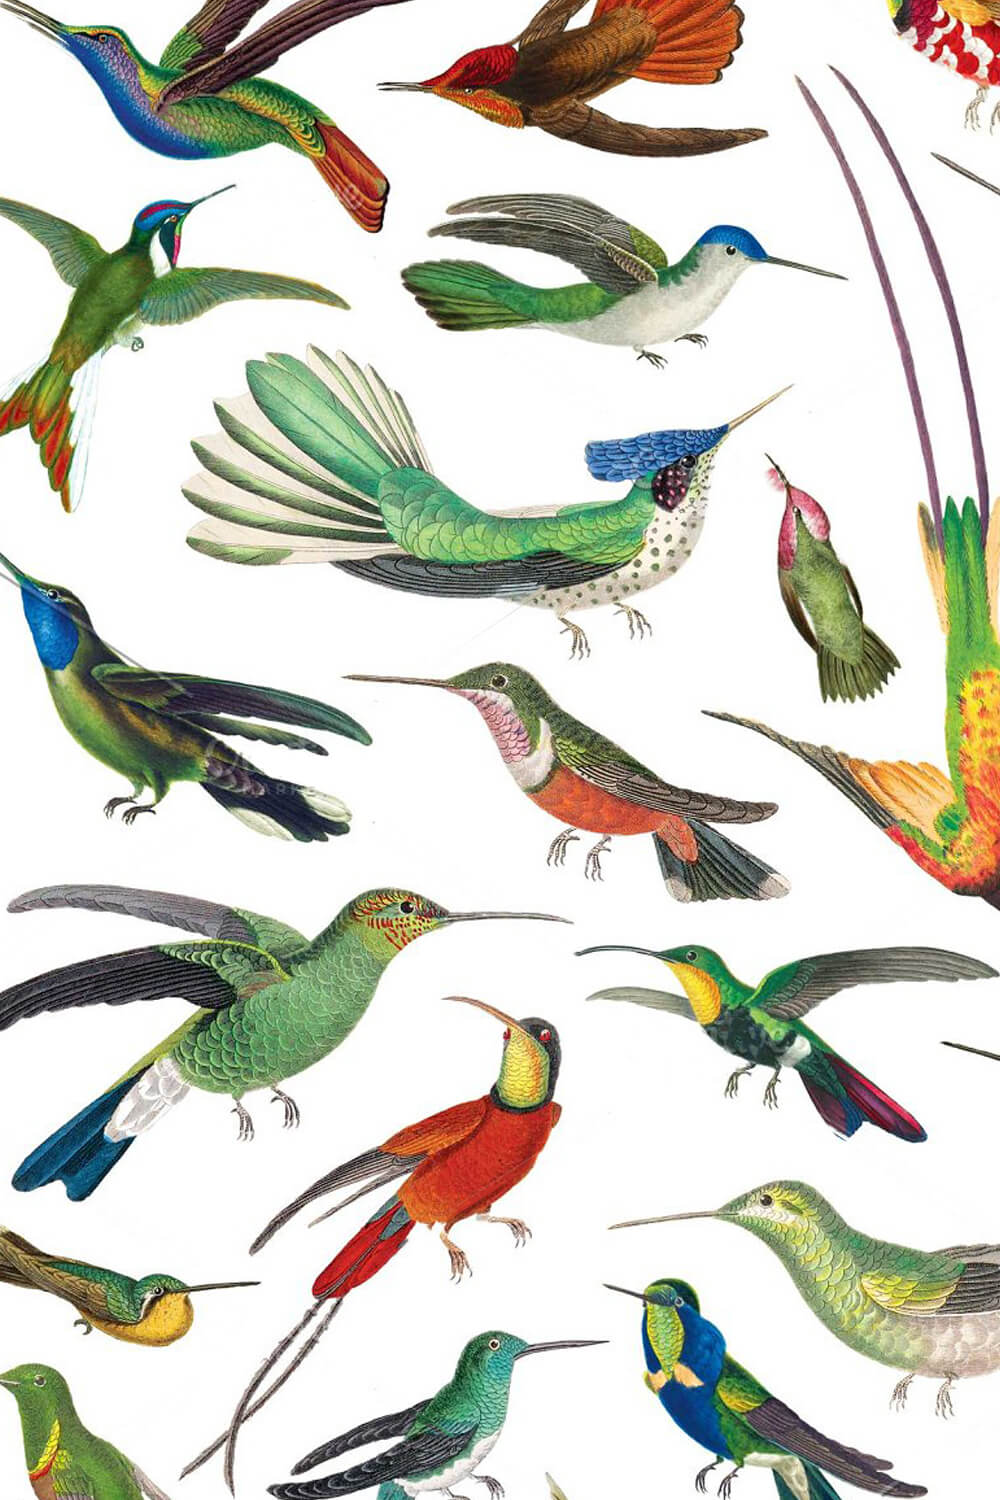 Many different hummingbirds in flight on a white background.